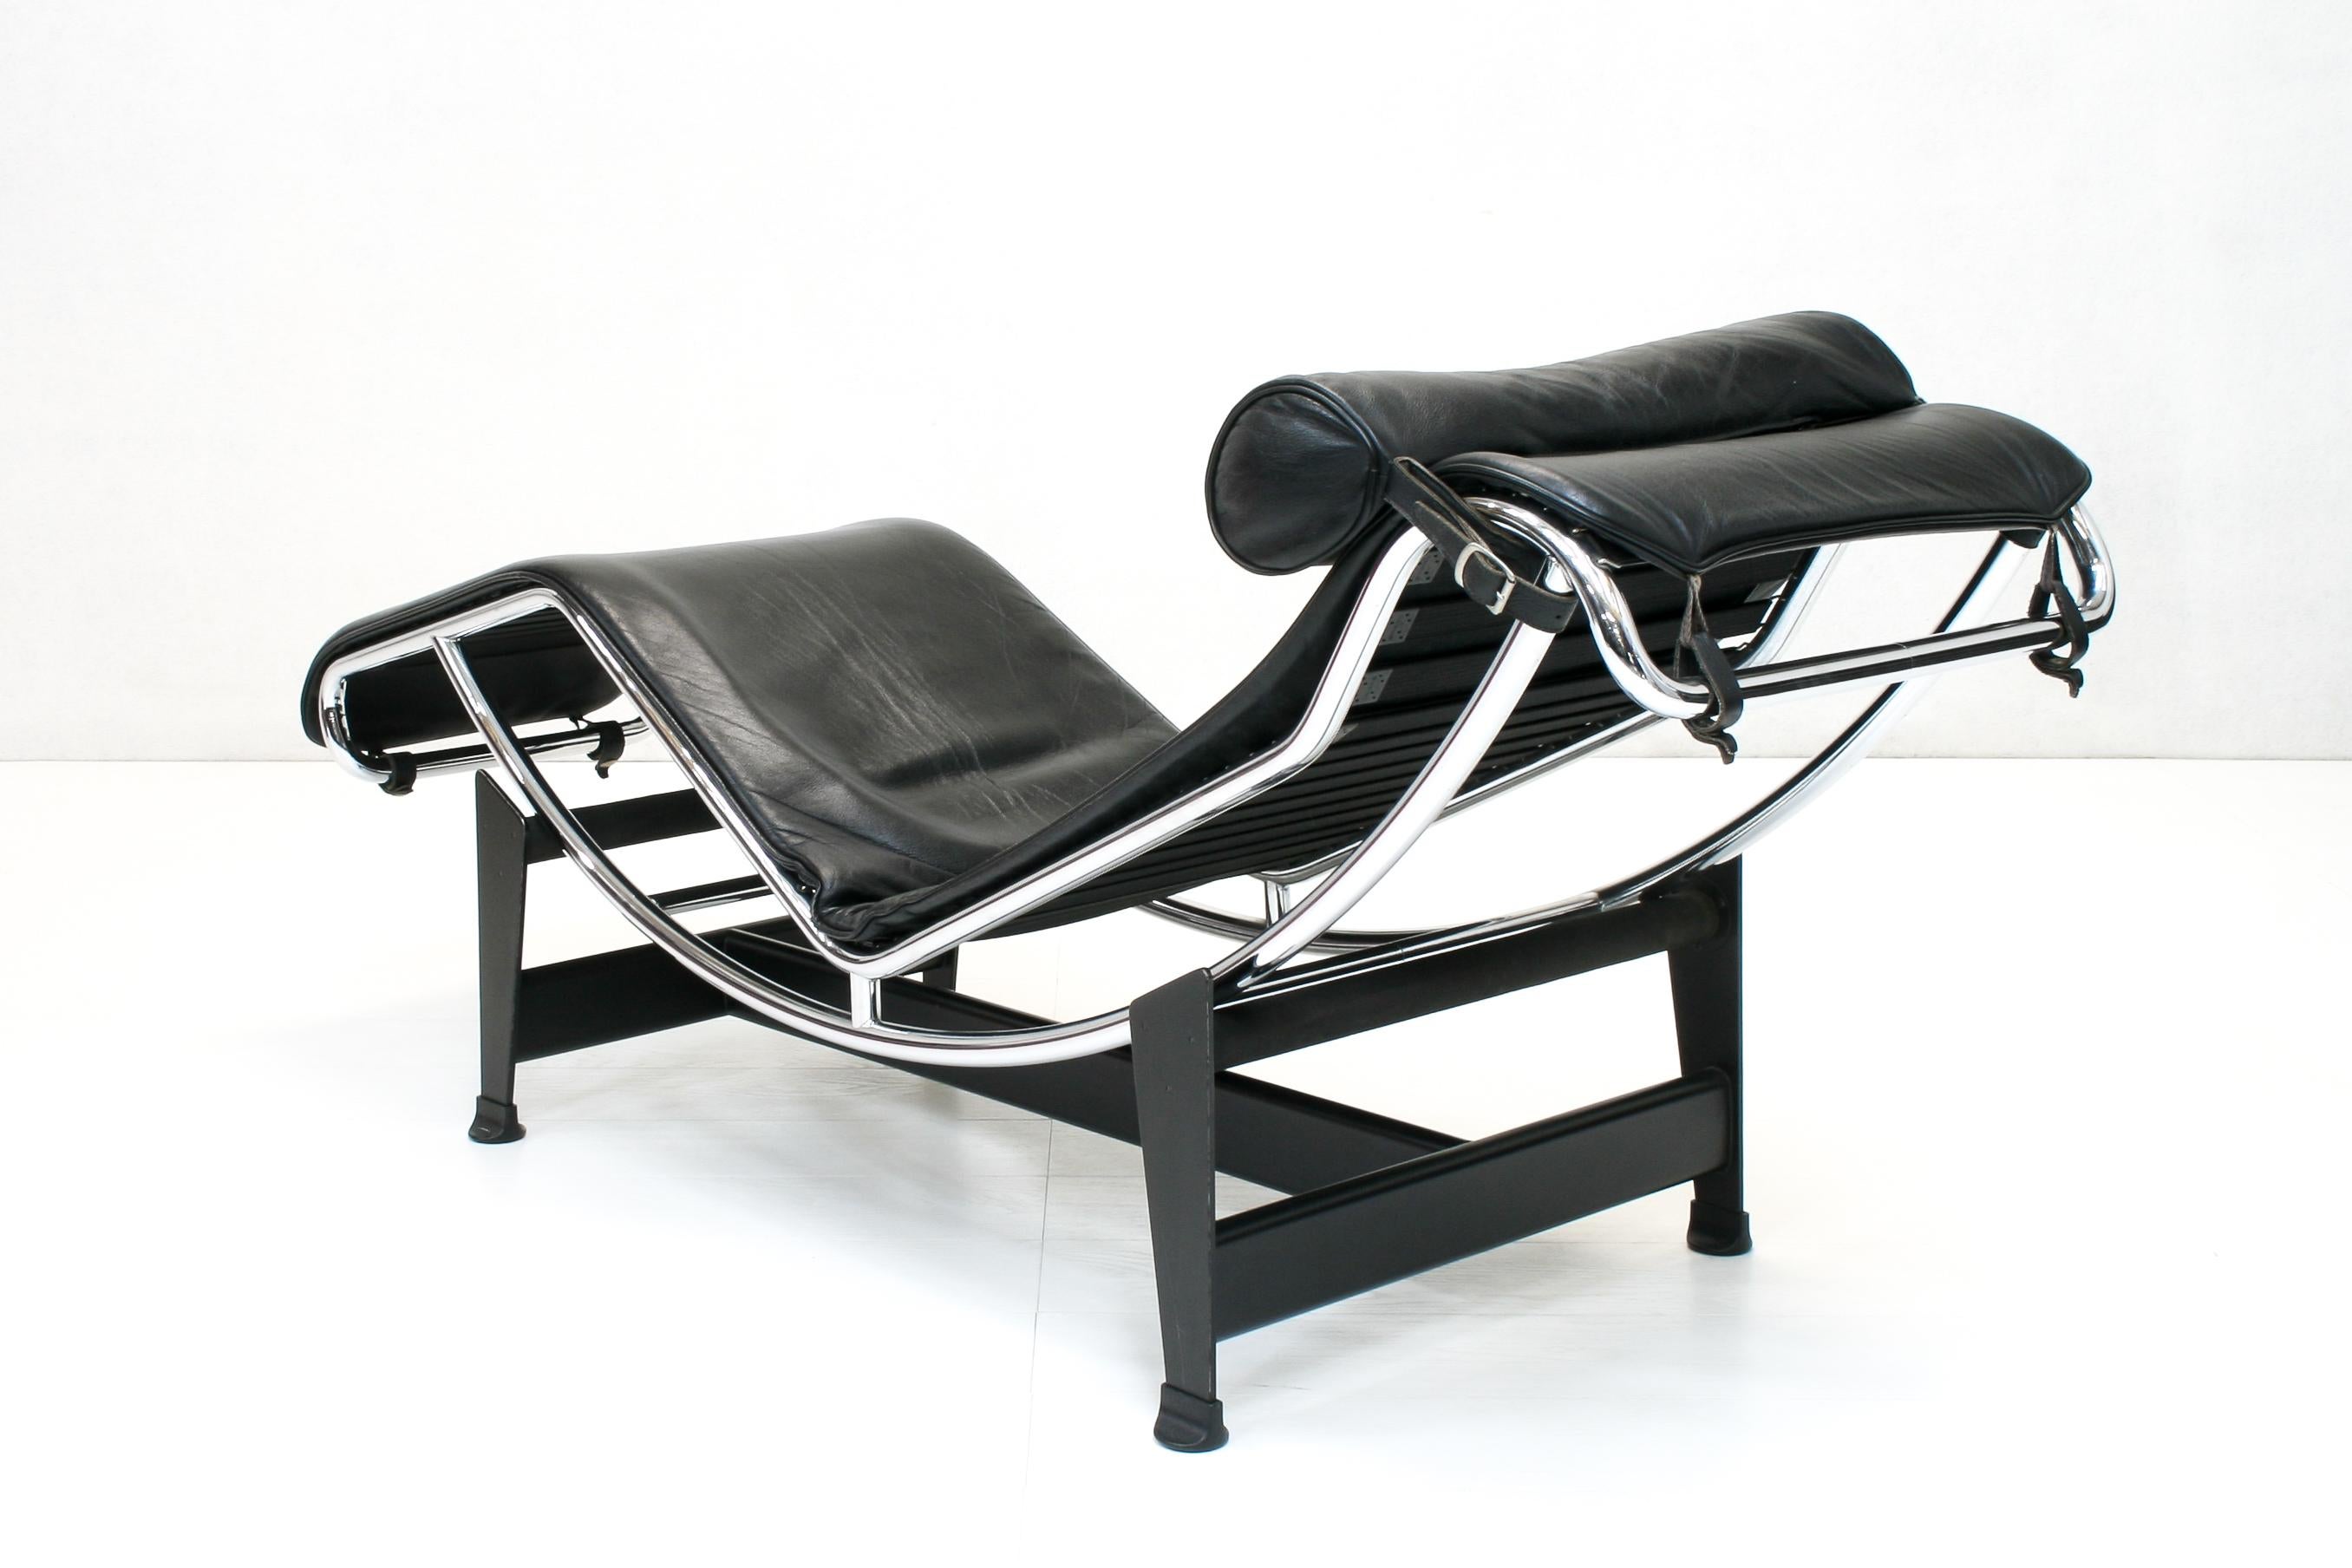 Bauhaus LC4 Chaise Longue by Charlotte Perriand & Le Corbusier for Cassina